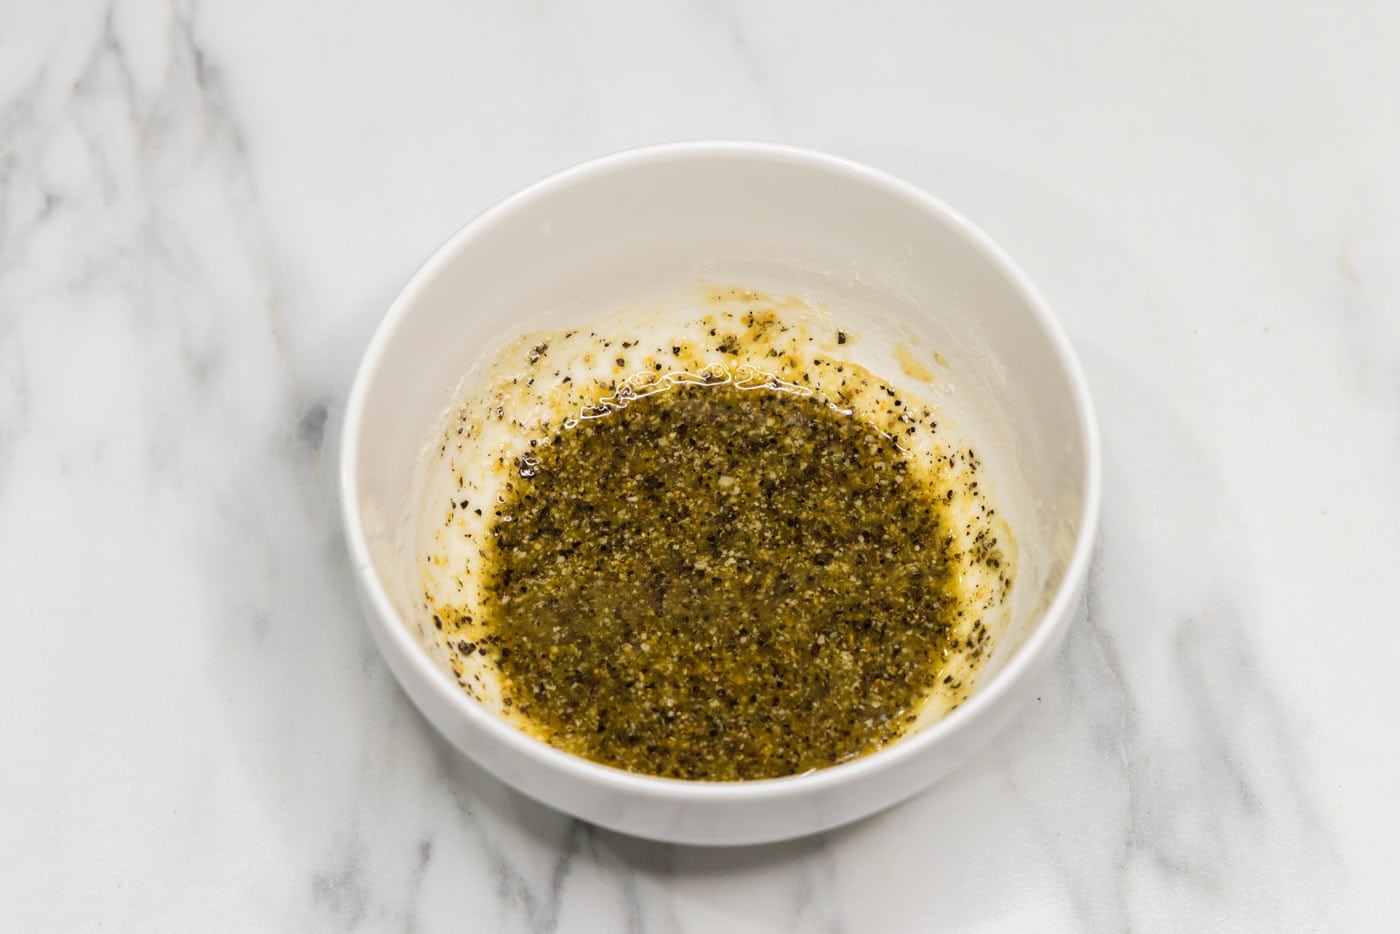 seasonings mixed with olive oil in a small bowl